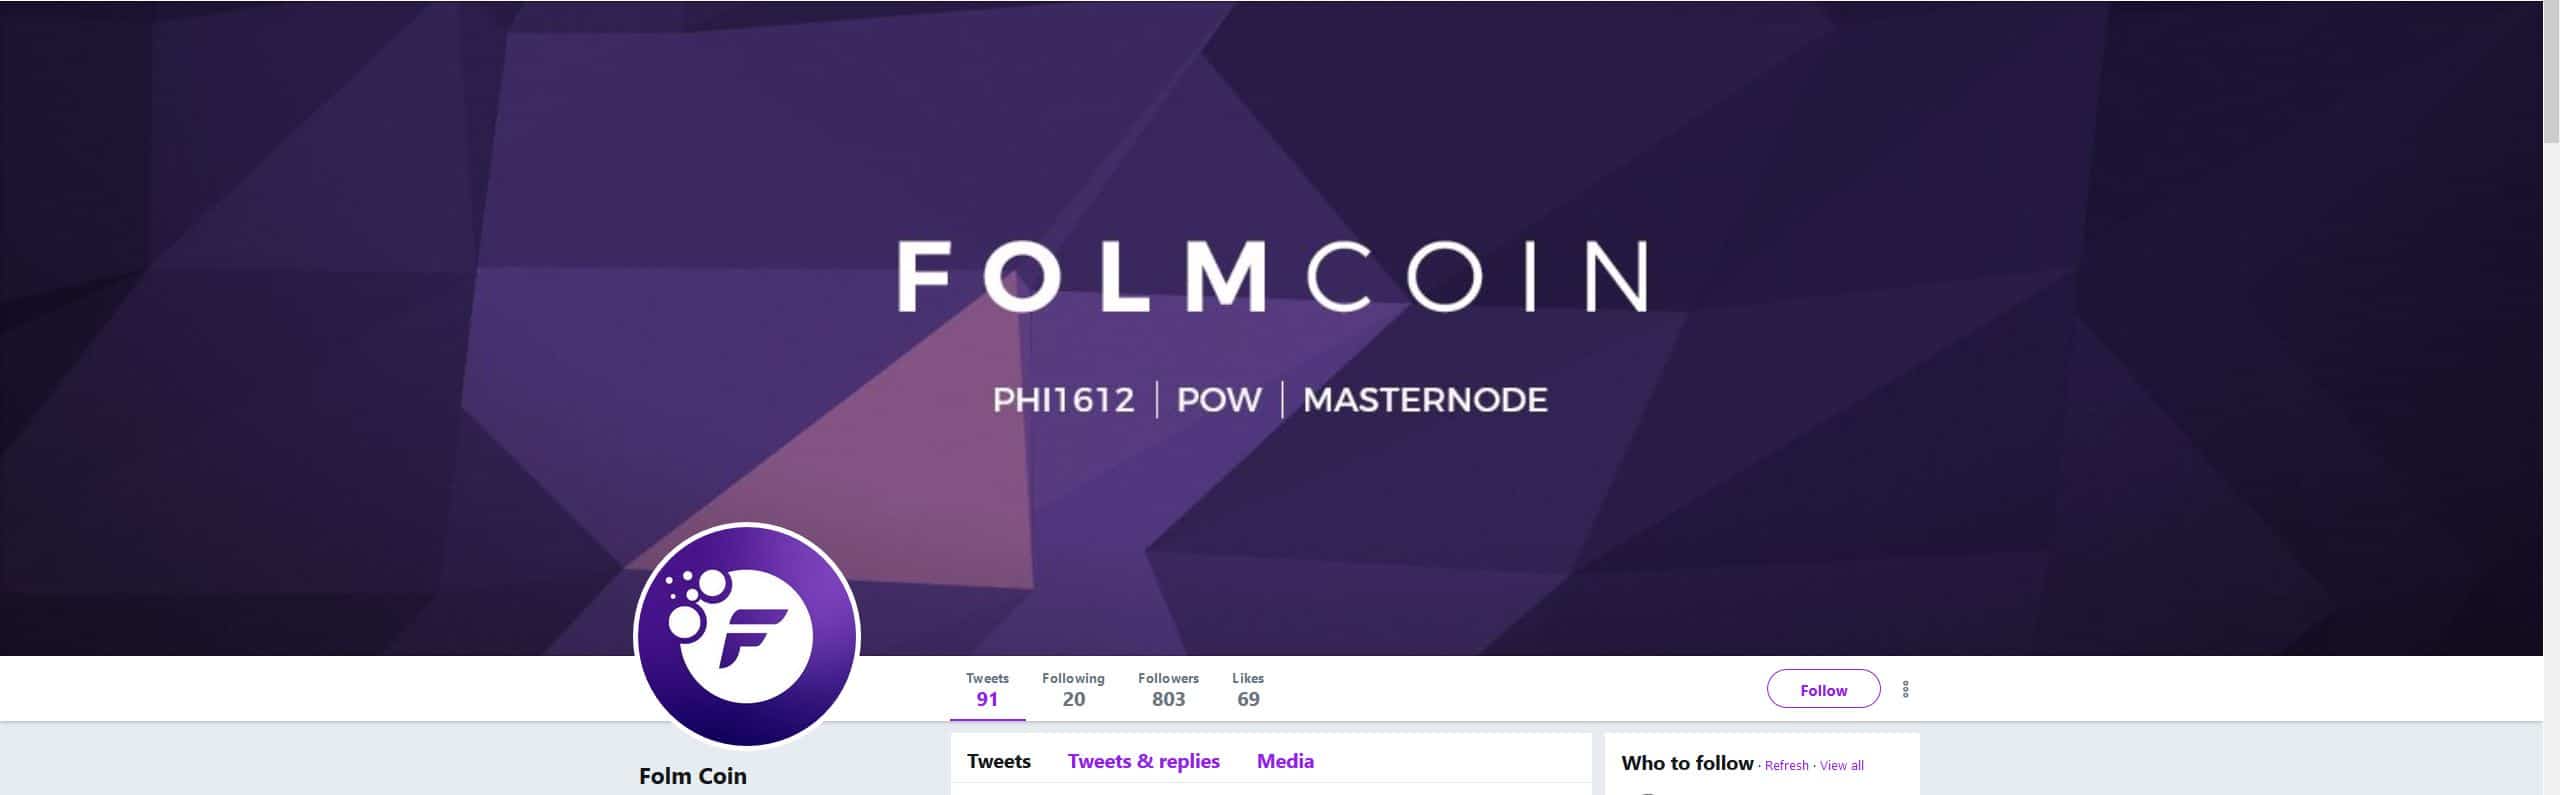 FOLM coin image